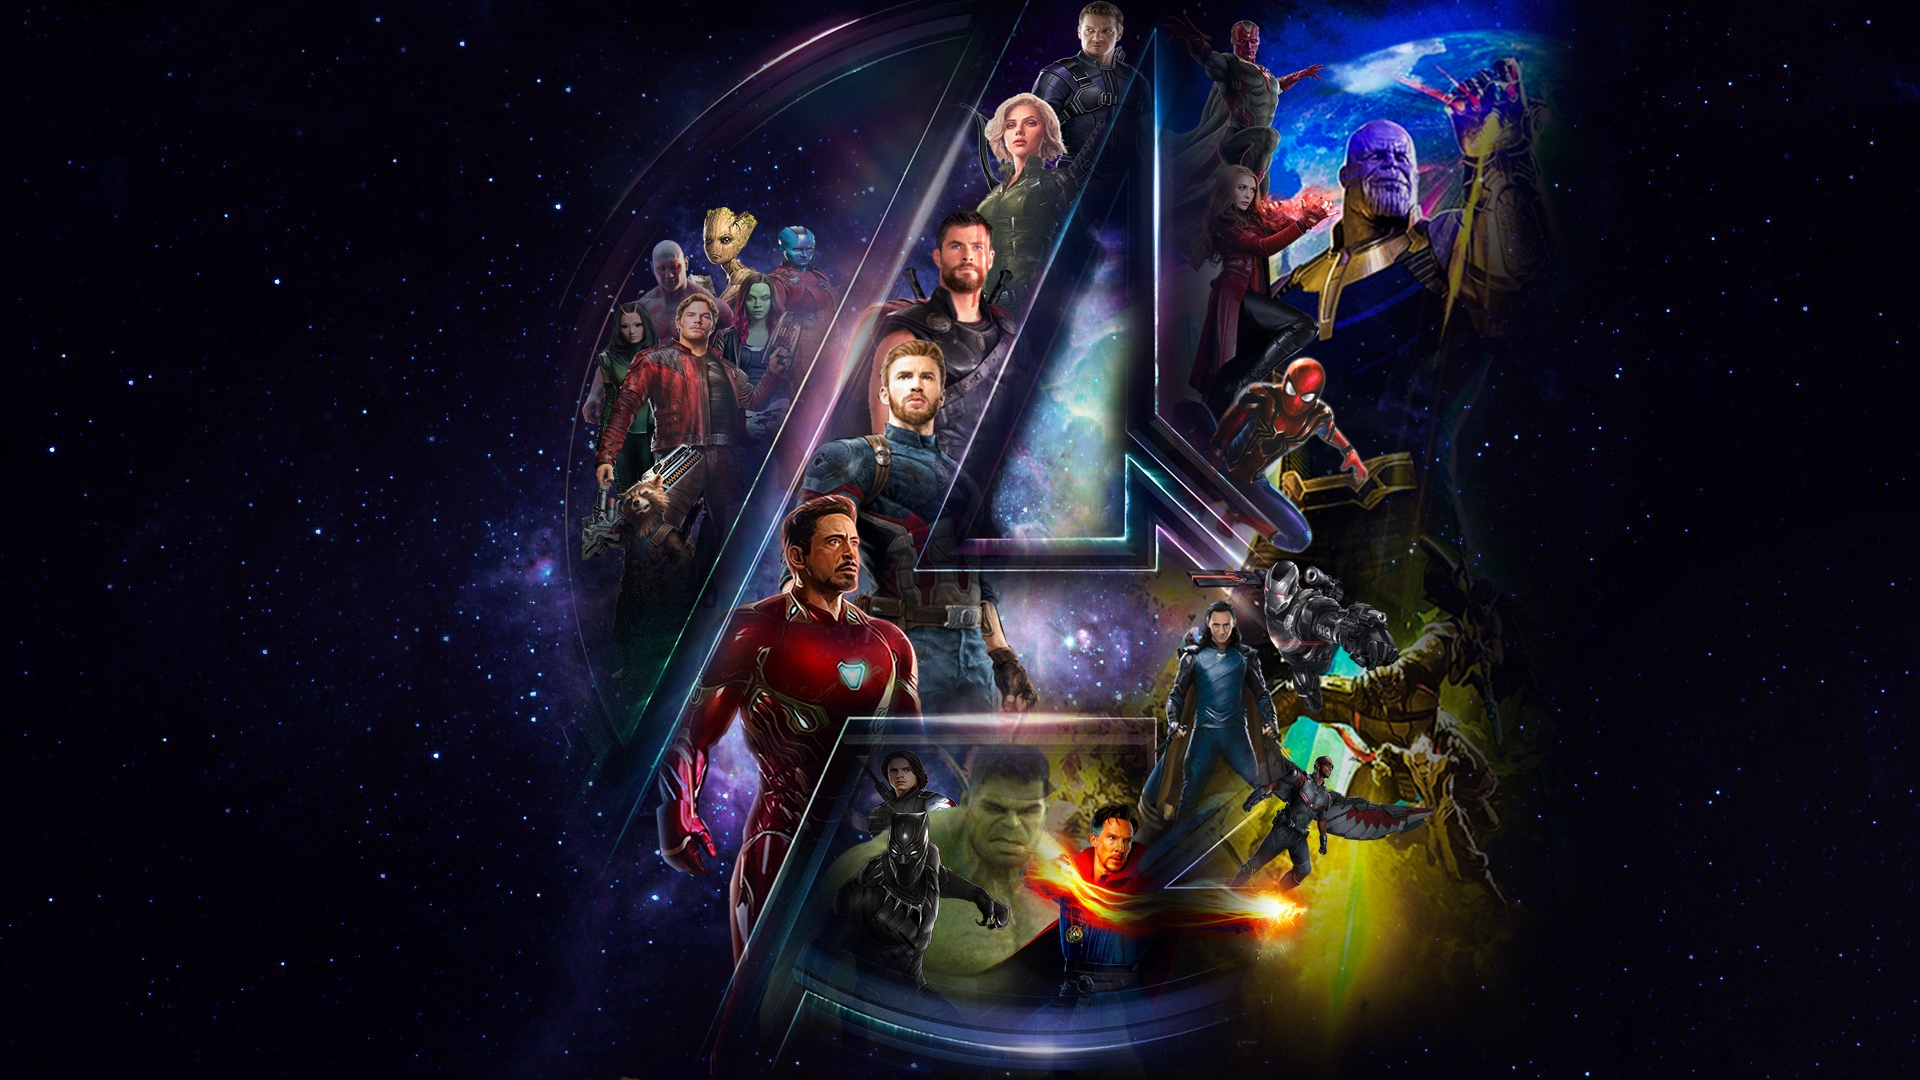 avengers infinity war full movie free download in english hd